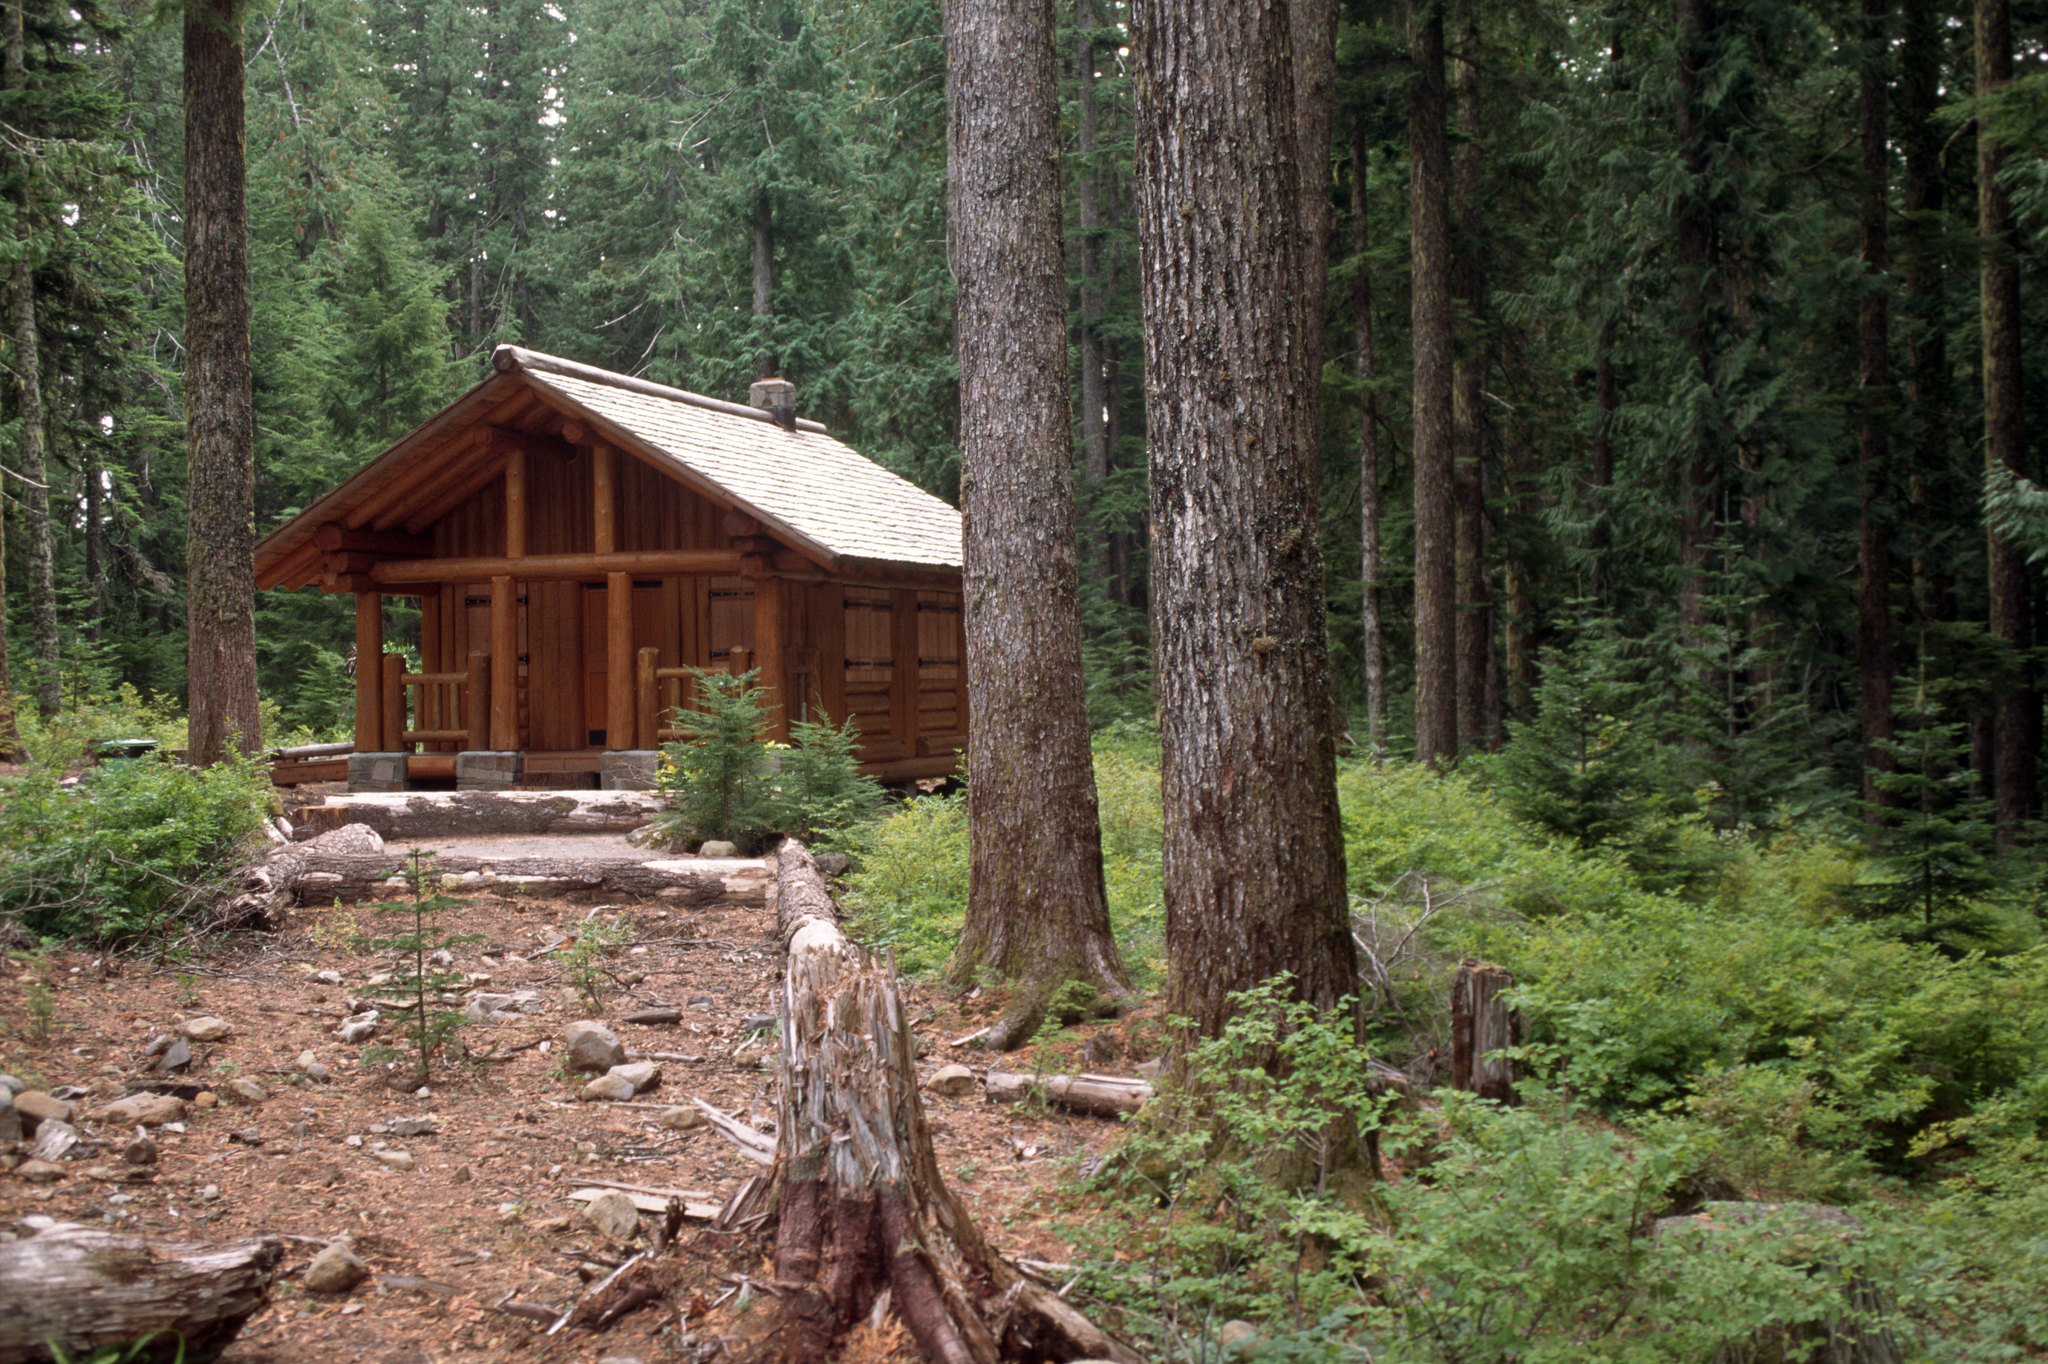 A picture of a cabin house tucked away in a forested area.